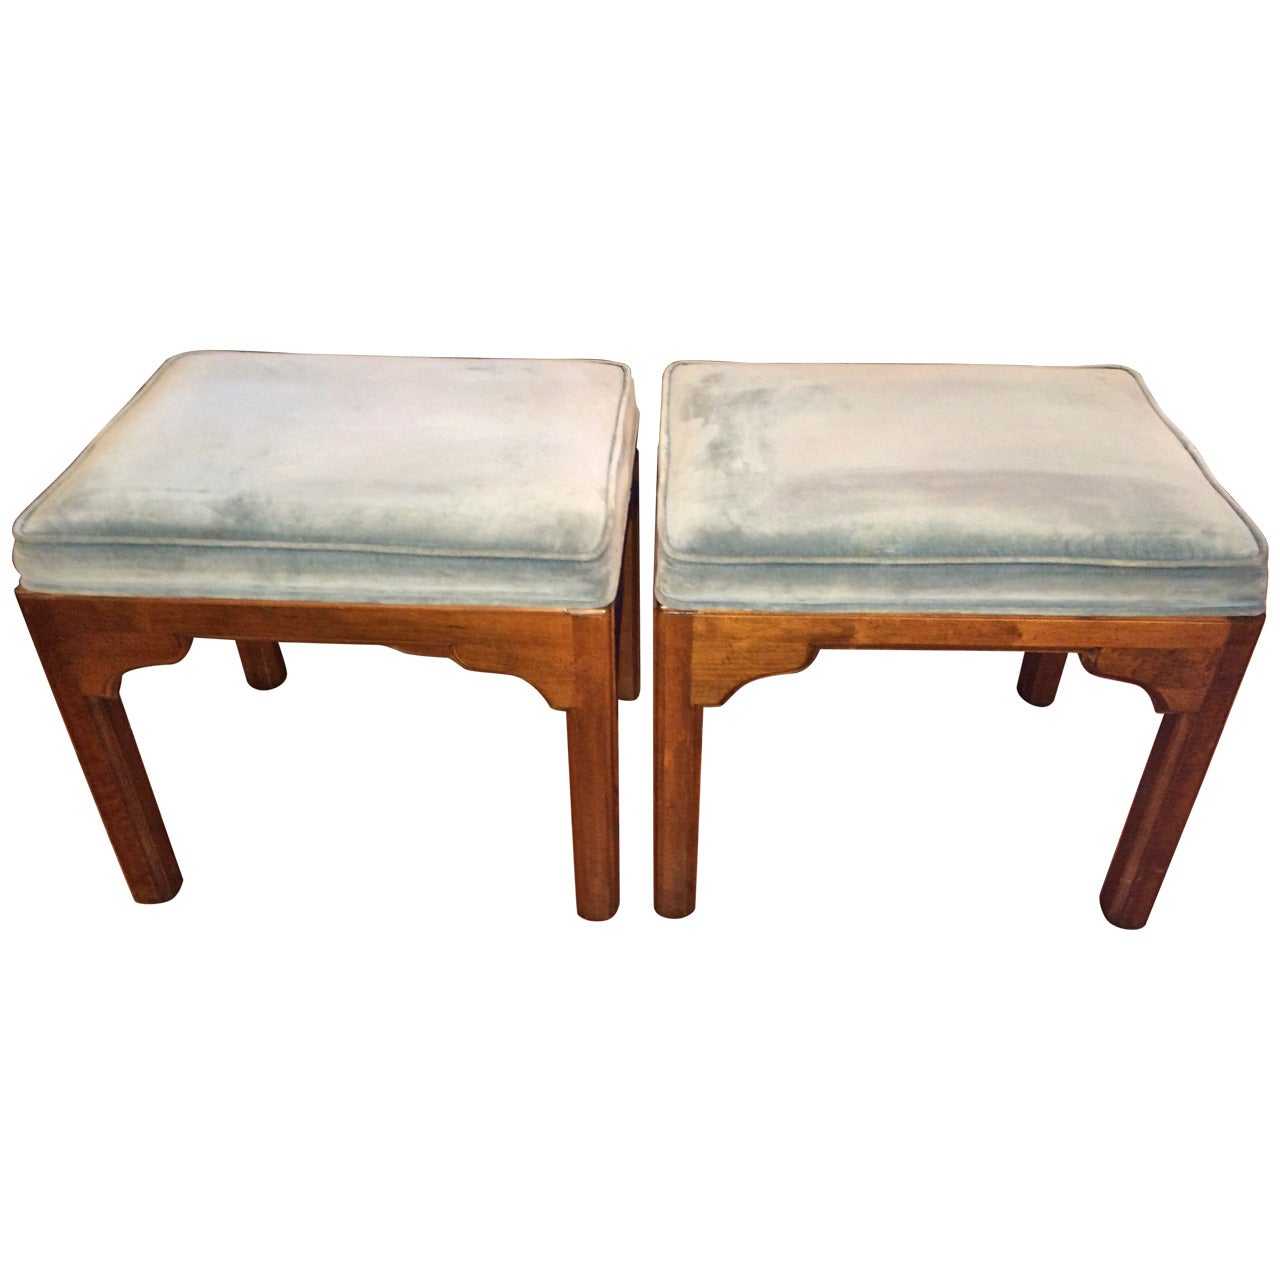 Pair of Ethan Allen Stools